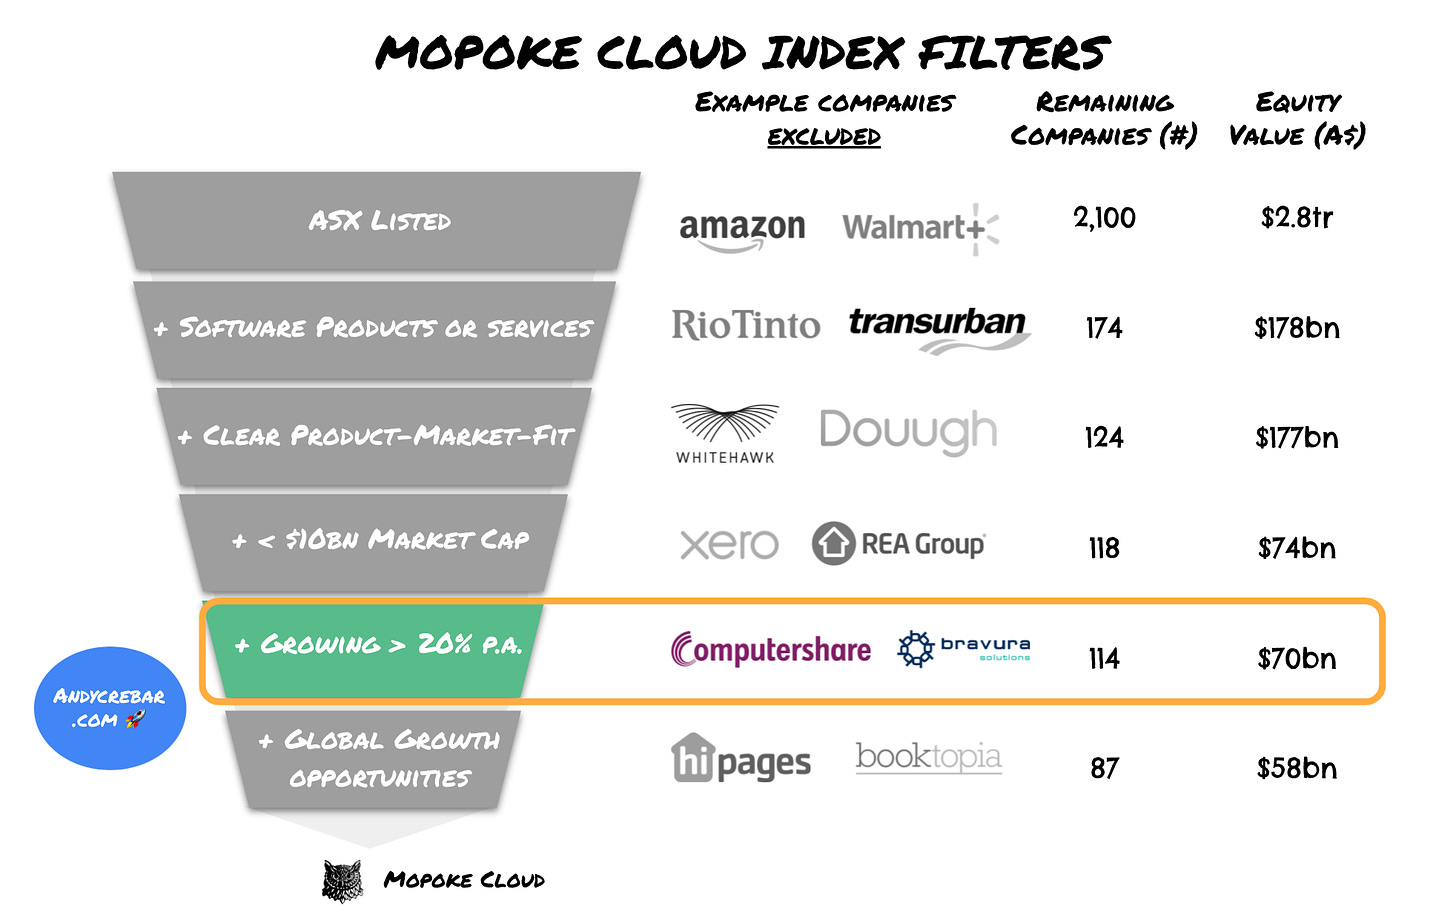 Mopoke Cloud Index filters - growing revenue 20% year on year